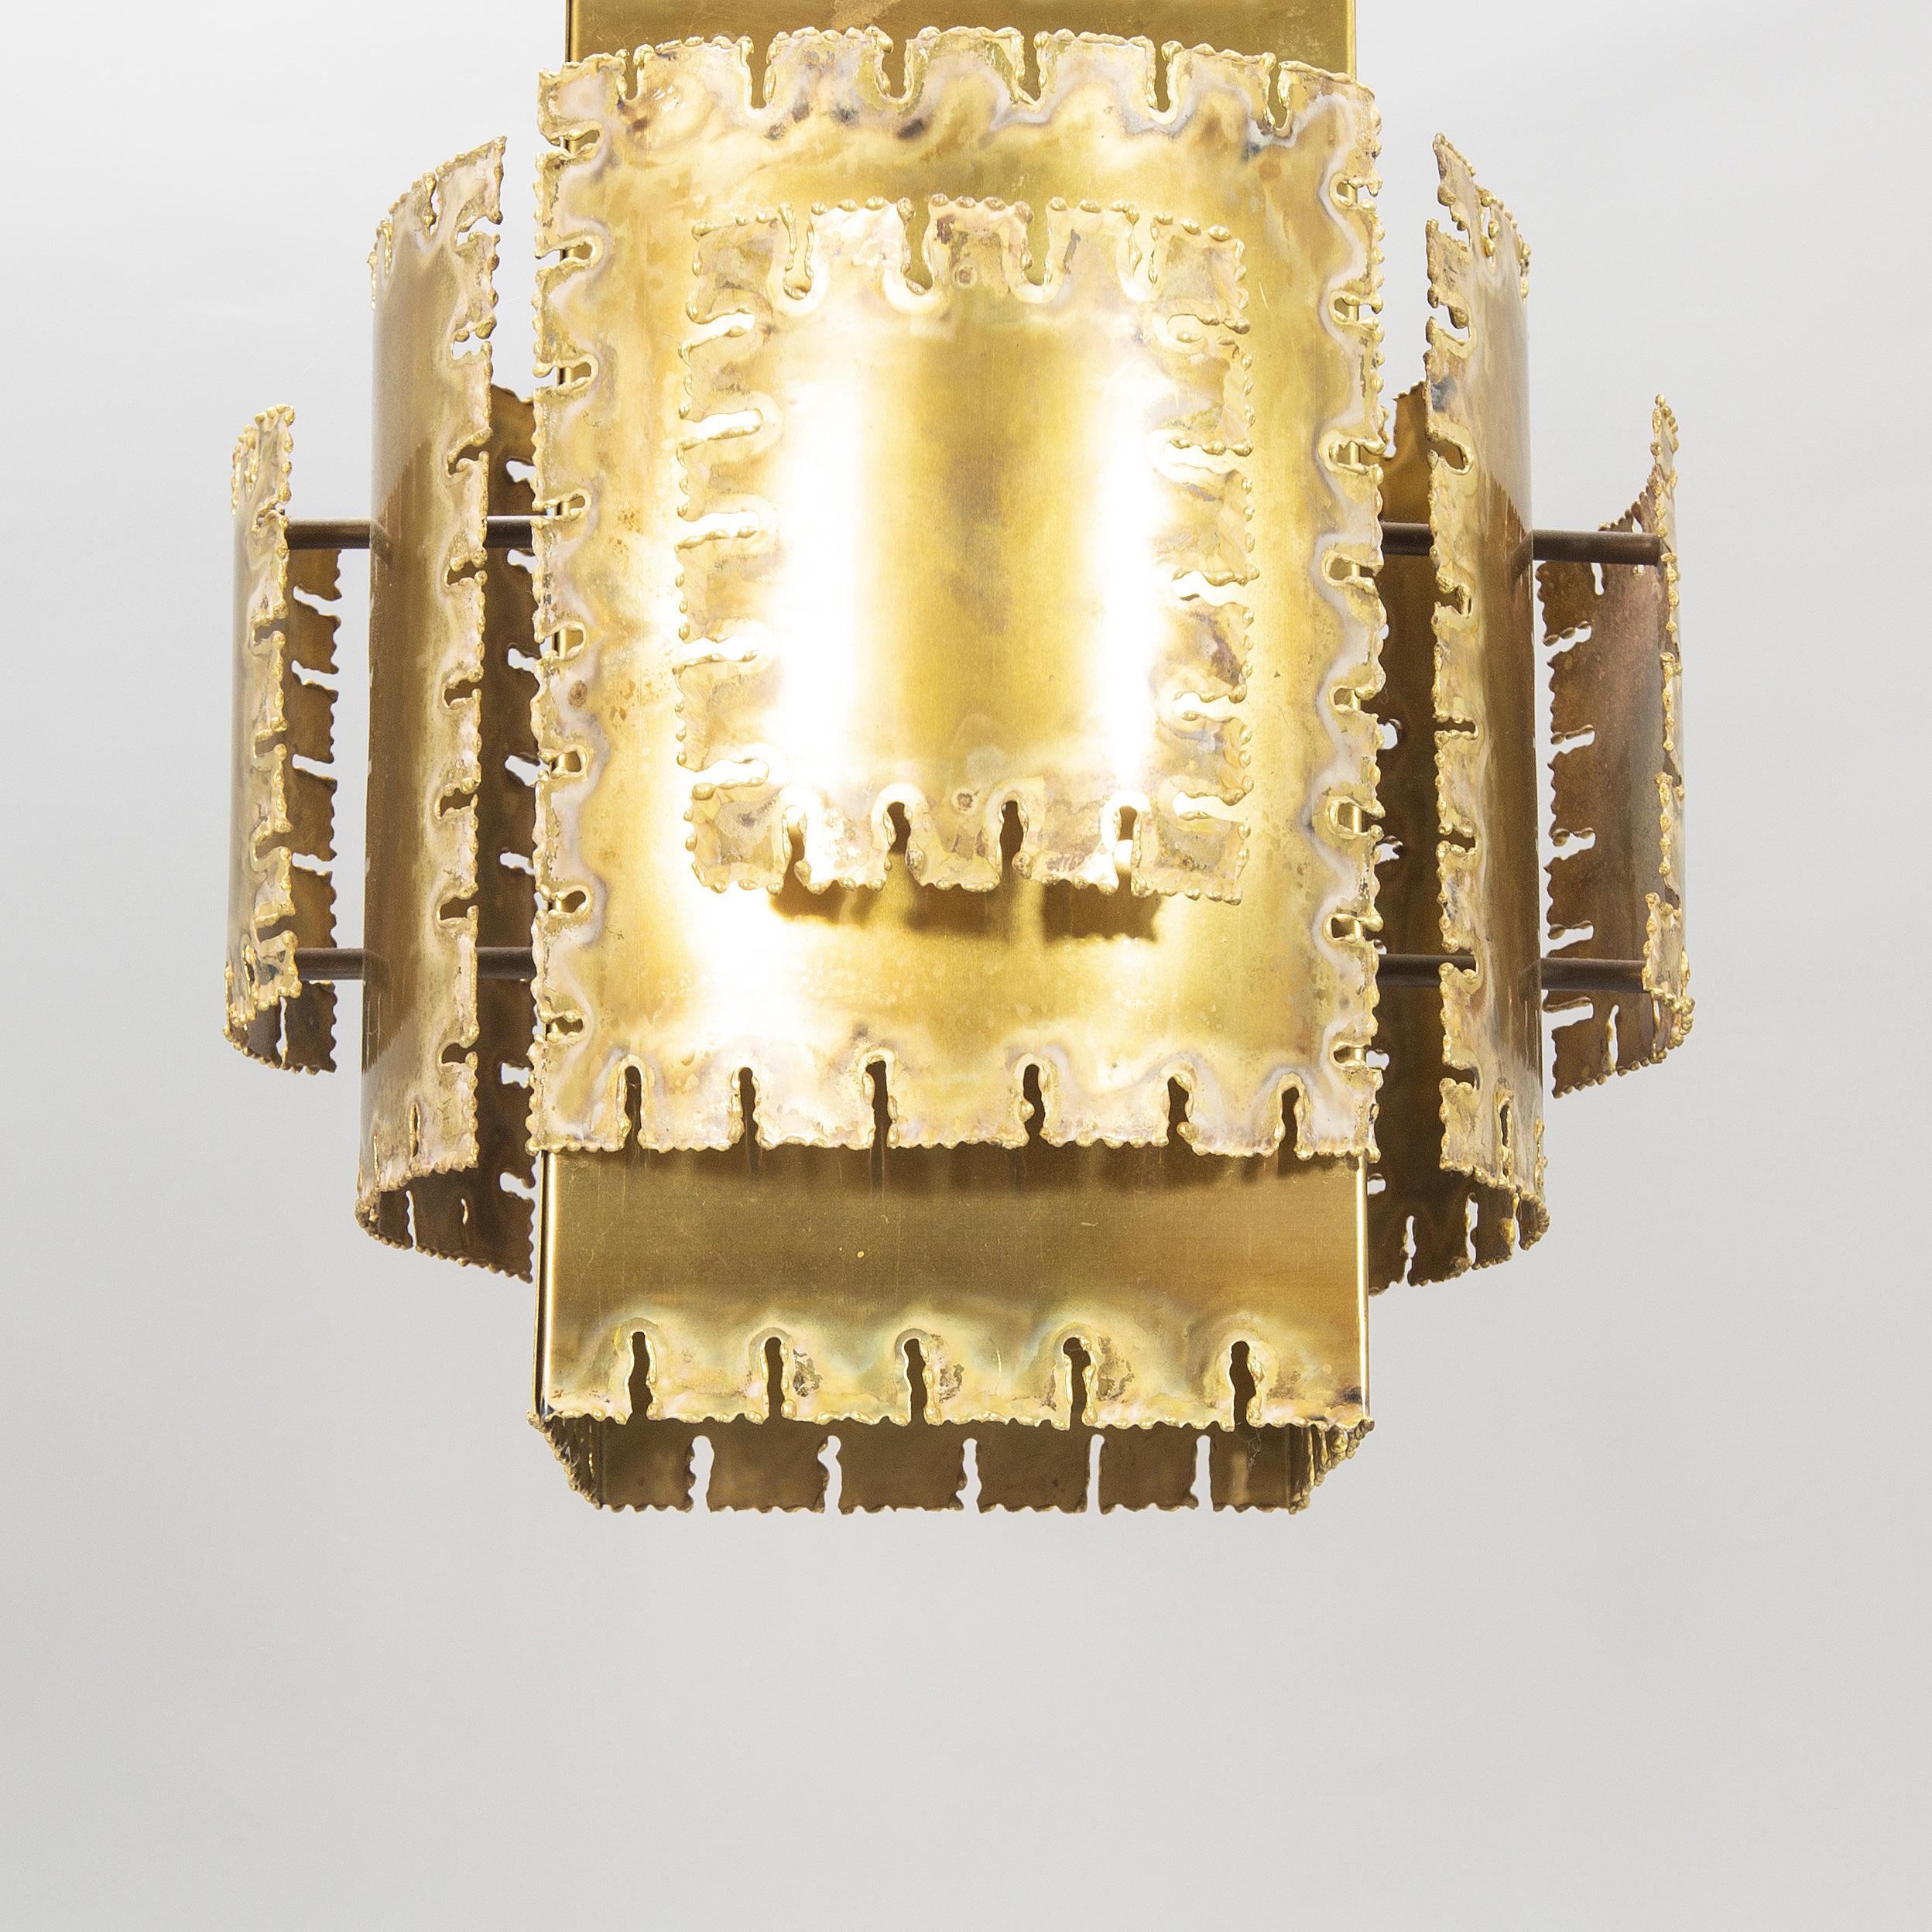 Svend Aage Holm Sorensen Brass Ceiling lamp Denmark 1970
Good condition 

All the designs of Svend Aage Holm Sorensen were created in his own studio where they were hand built using brass, acids, gas burn.